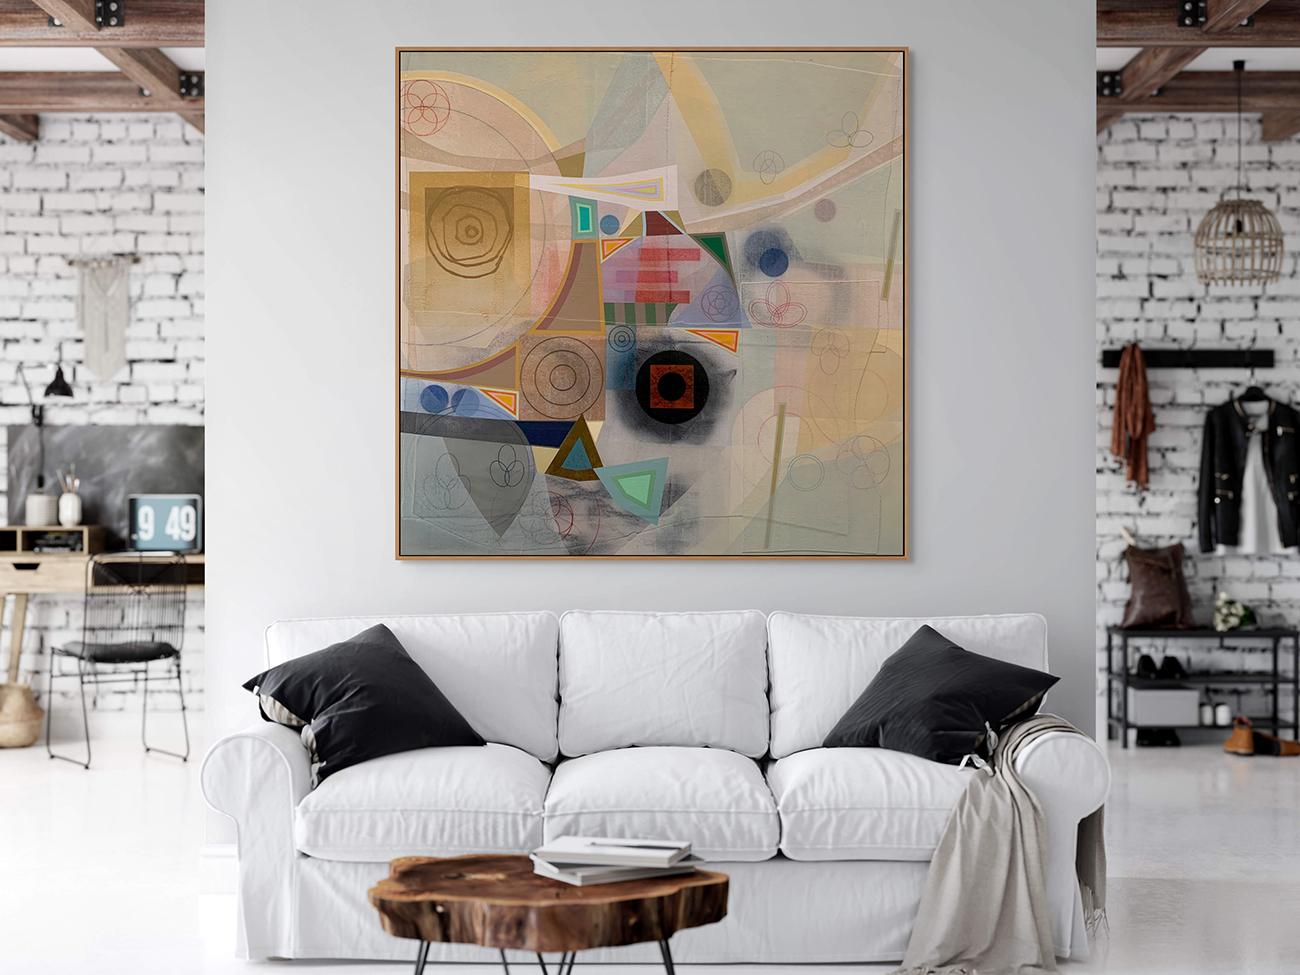 Lost Letters (Circle) (Abstrakte Malerei) (Braun), Abstract Painting, von Michael Barringer